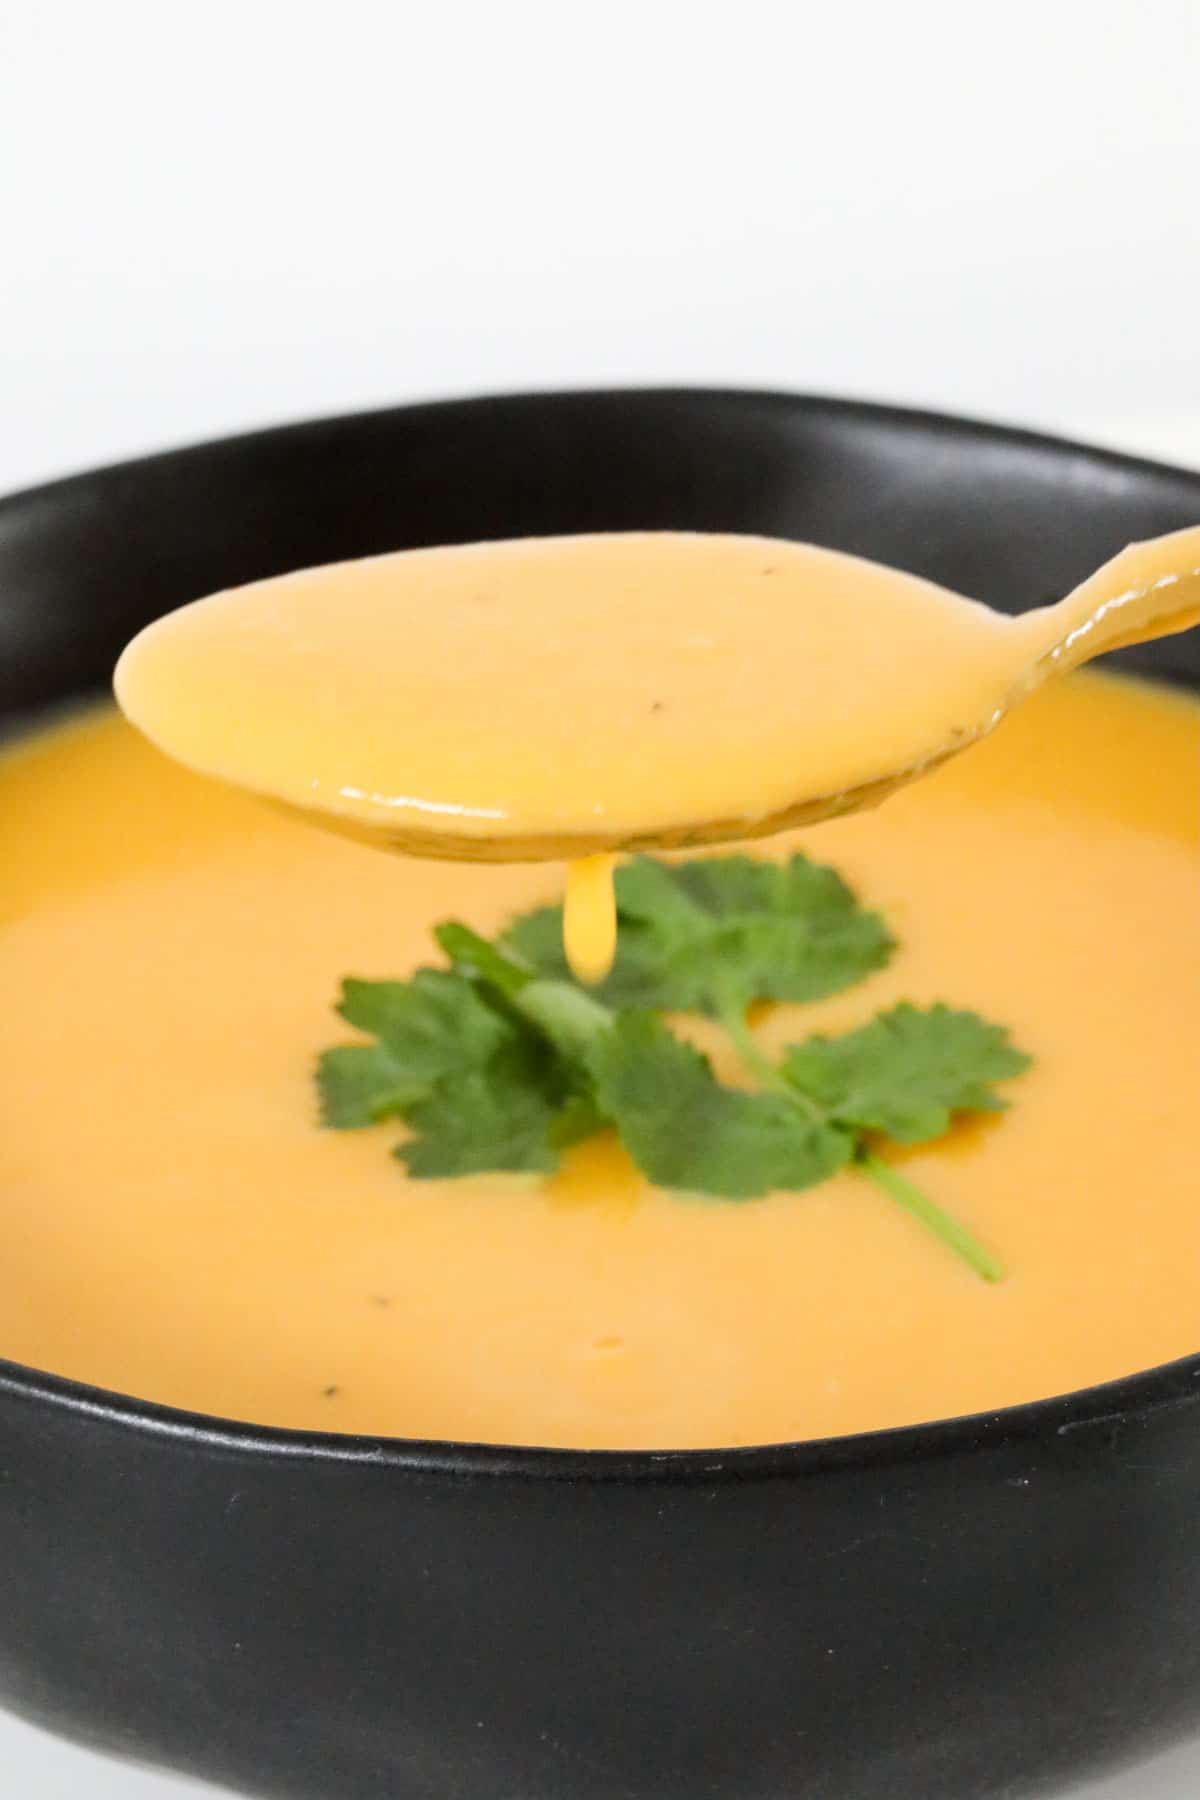 A golden spoon with a thick dark yellow soup lifted out of the black bowl beneath